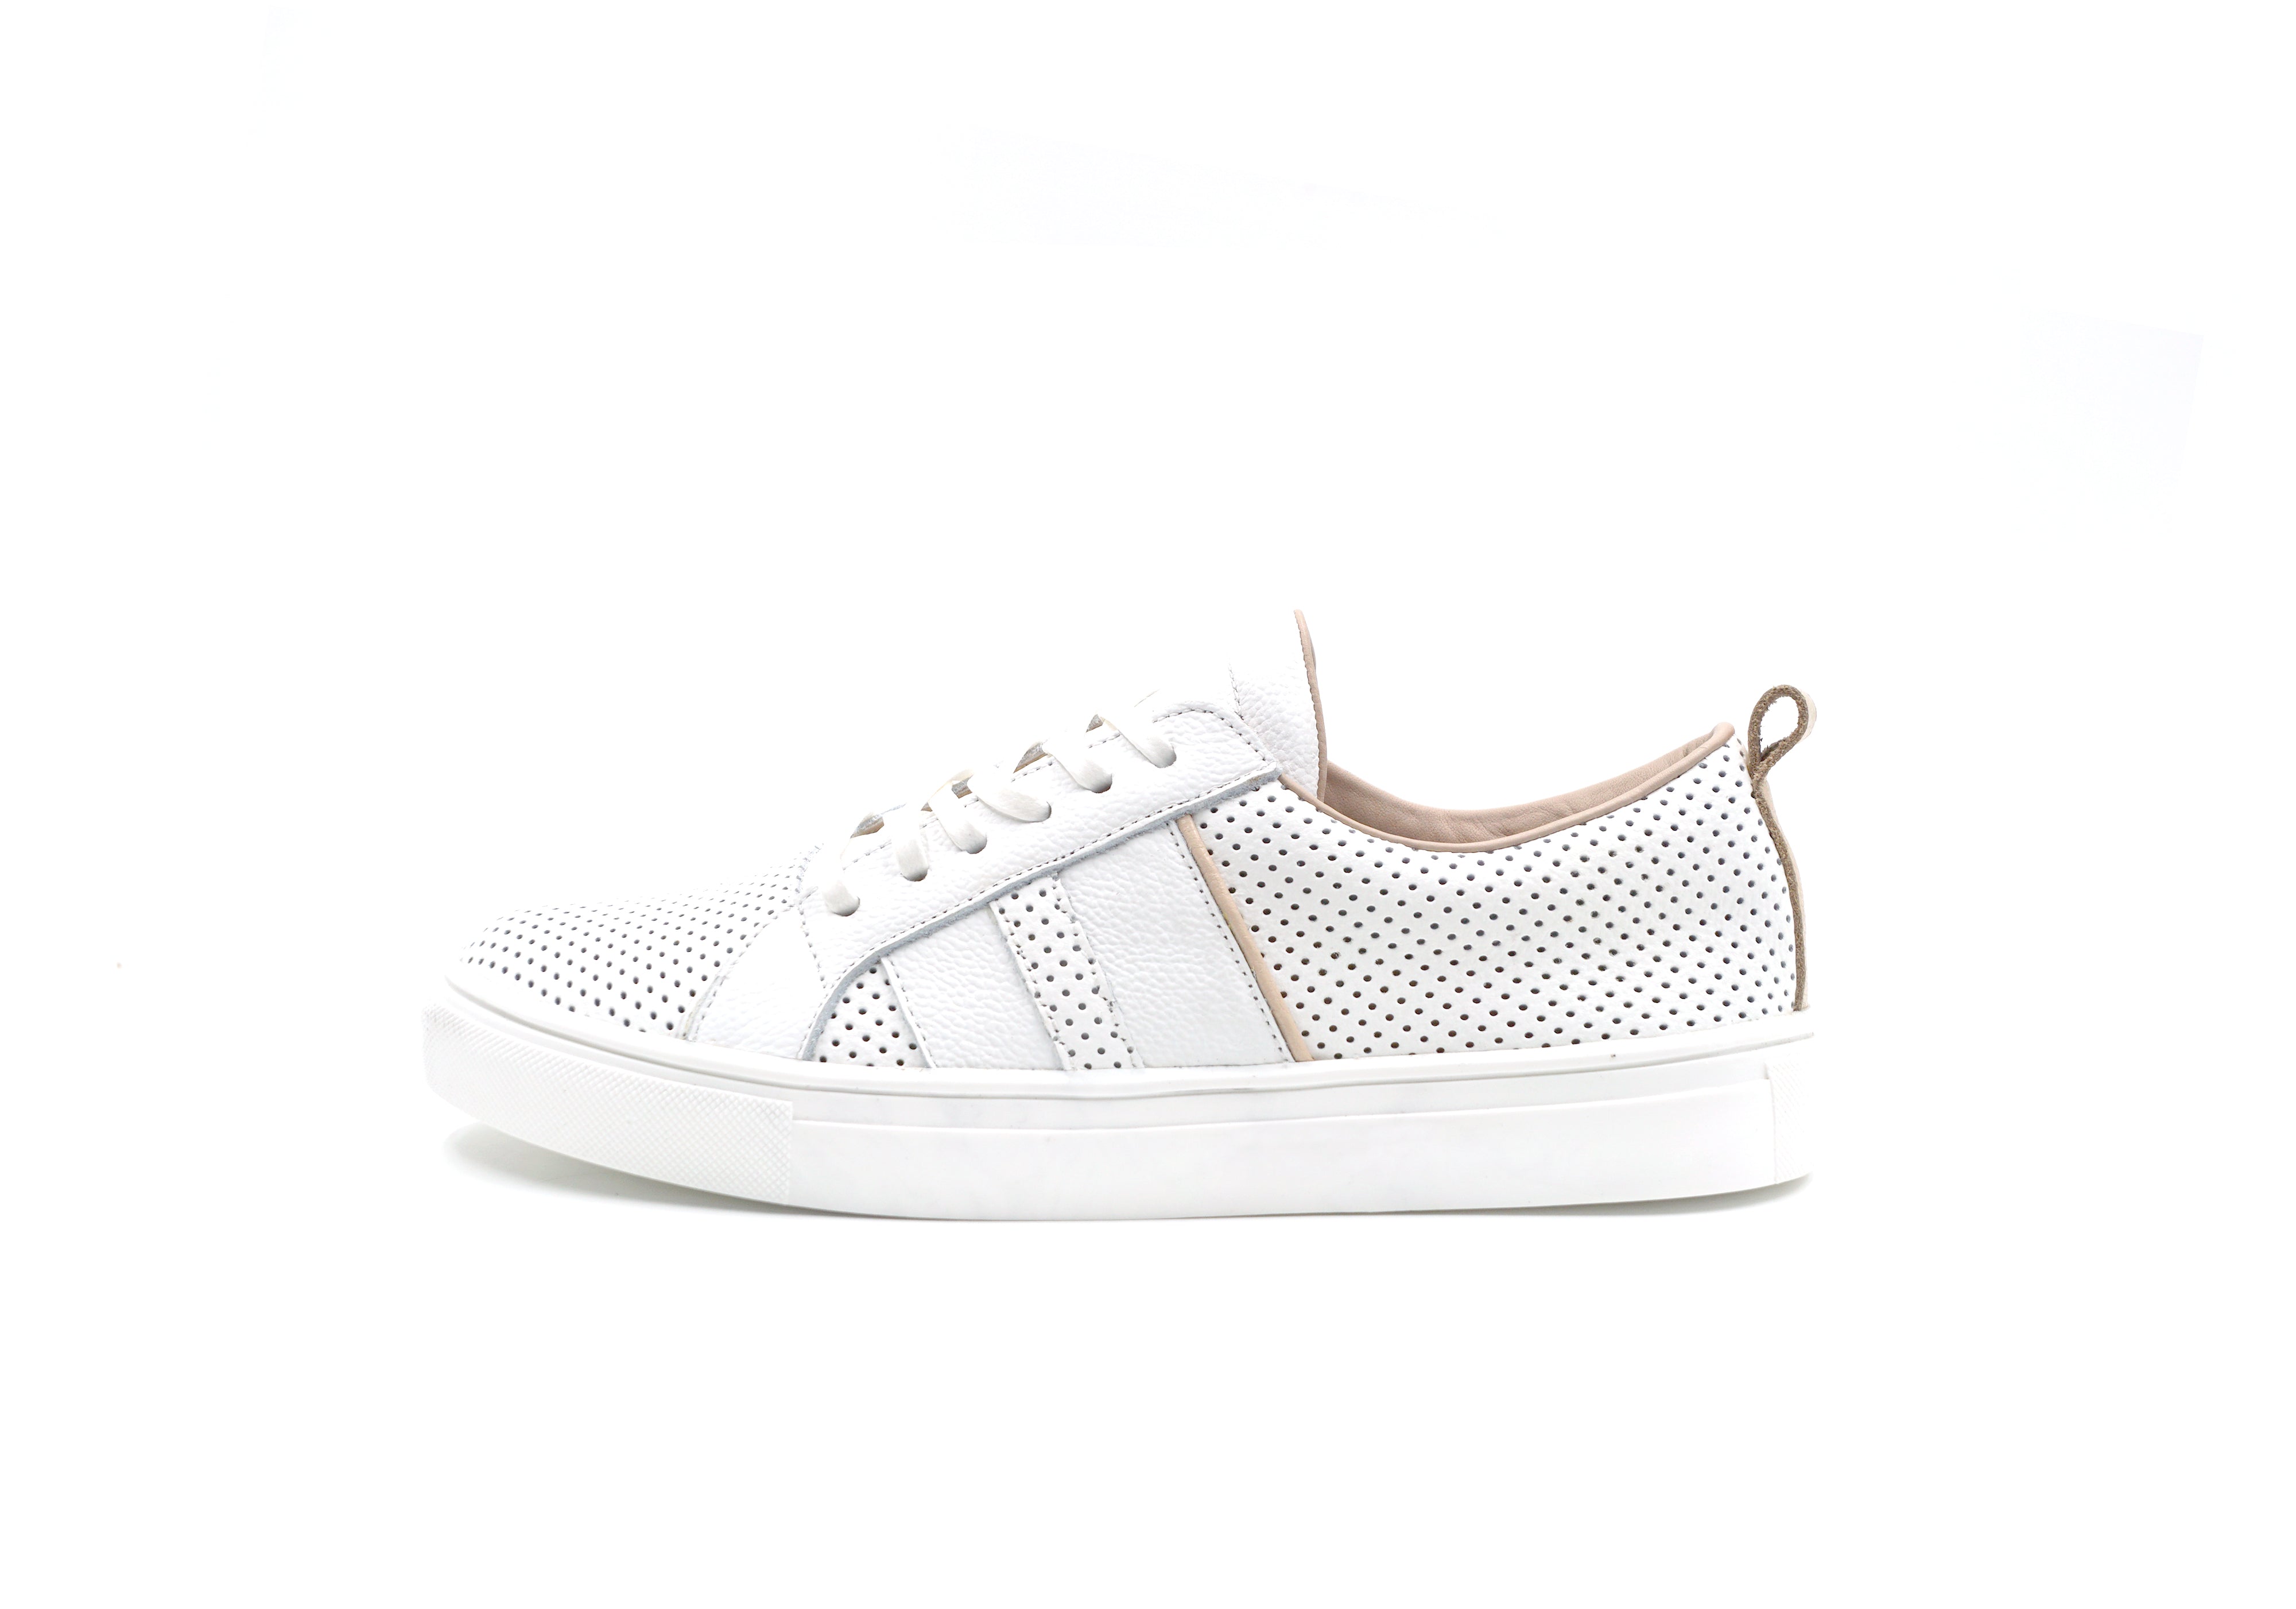 Ithaca perforated Sneaker with Side Stripes